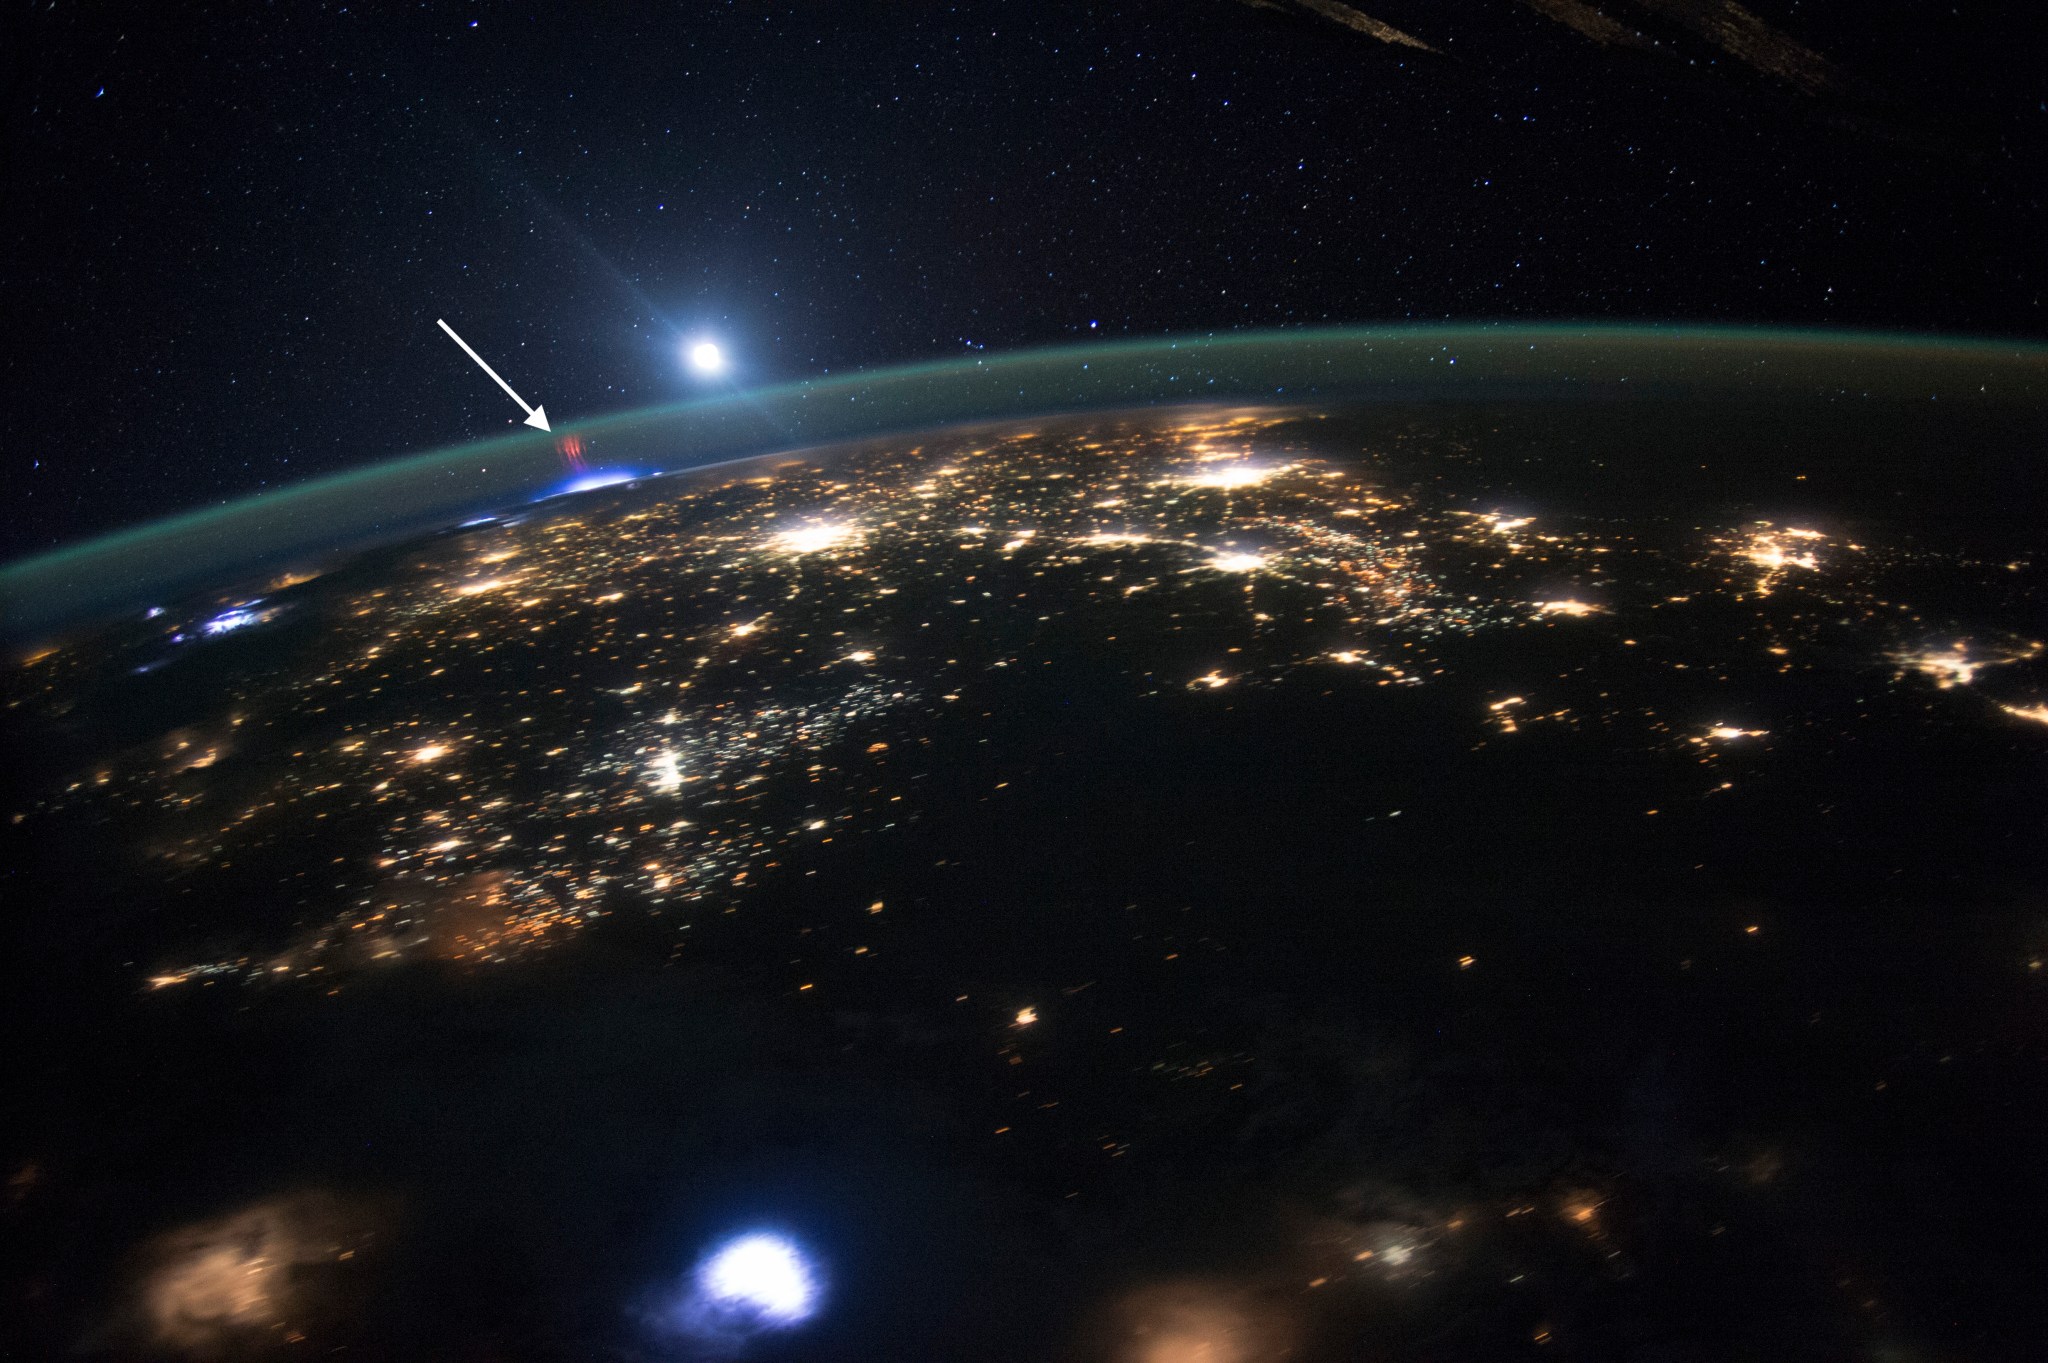 A view from Earth orbit at night. A thin, translucent green layer of the atmosphere veils clusters of city lights on Earths surface below. Over Earths limb, the blue light of a lightning storm has a small reddish light that appears above it -- a sprite.